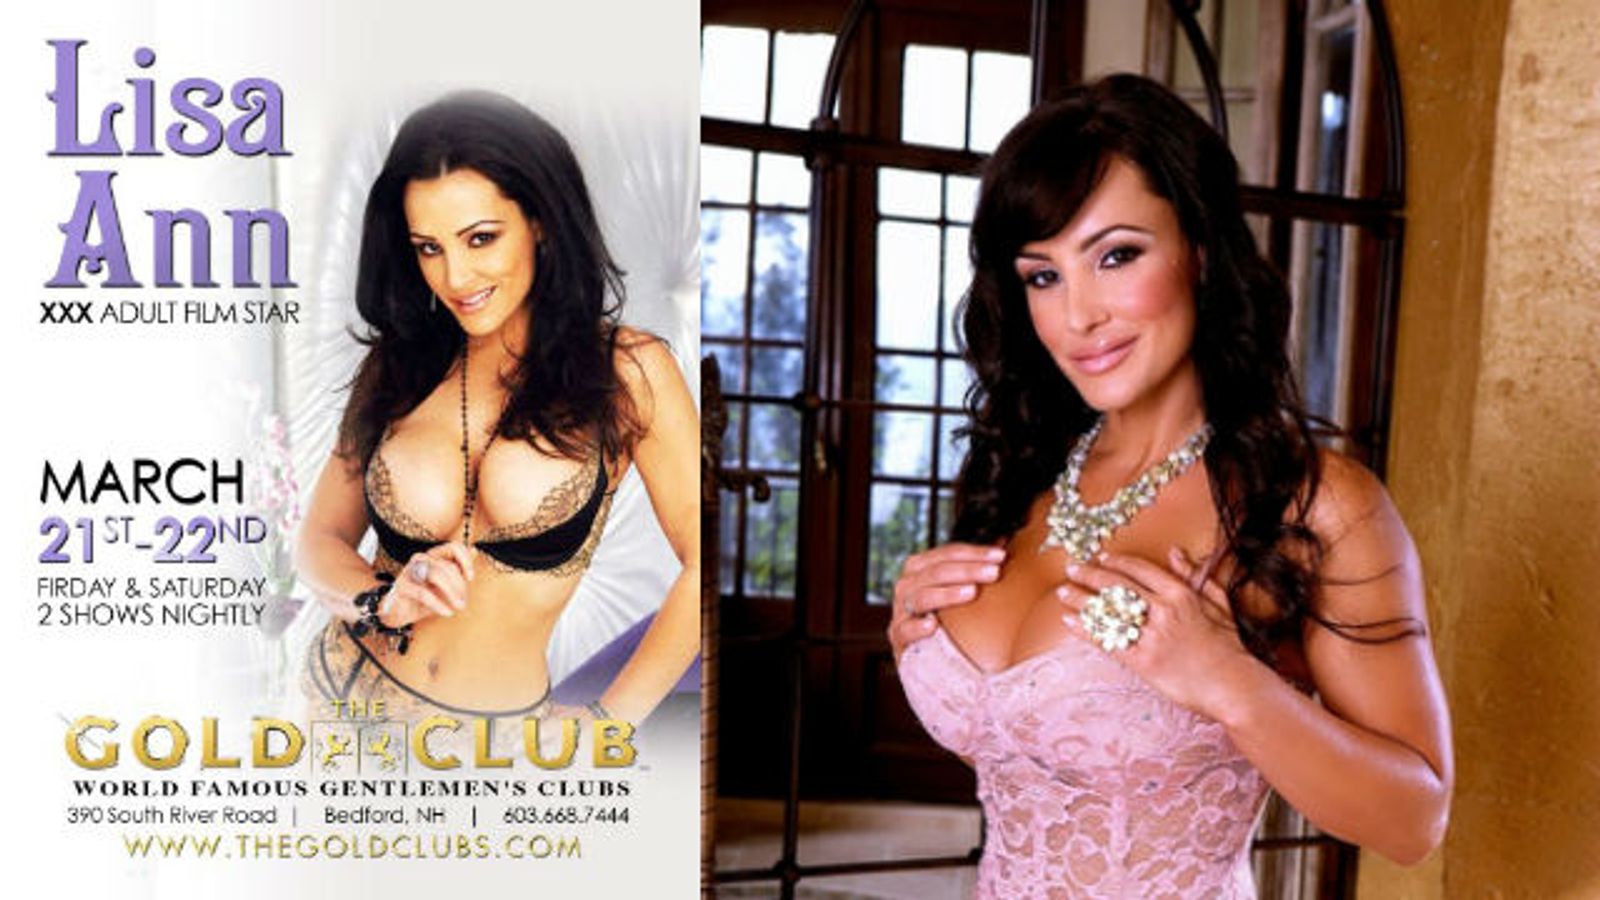 Lisa Ann Features at New Bedford, NH’s Gold Club, March 21-22